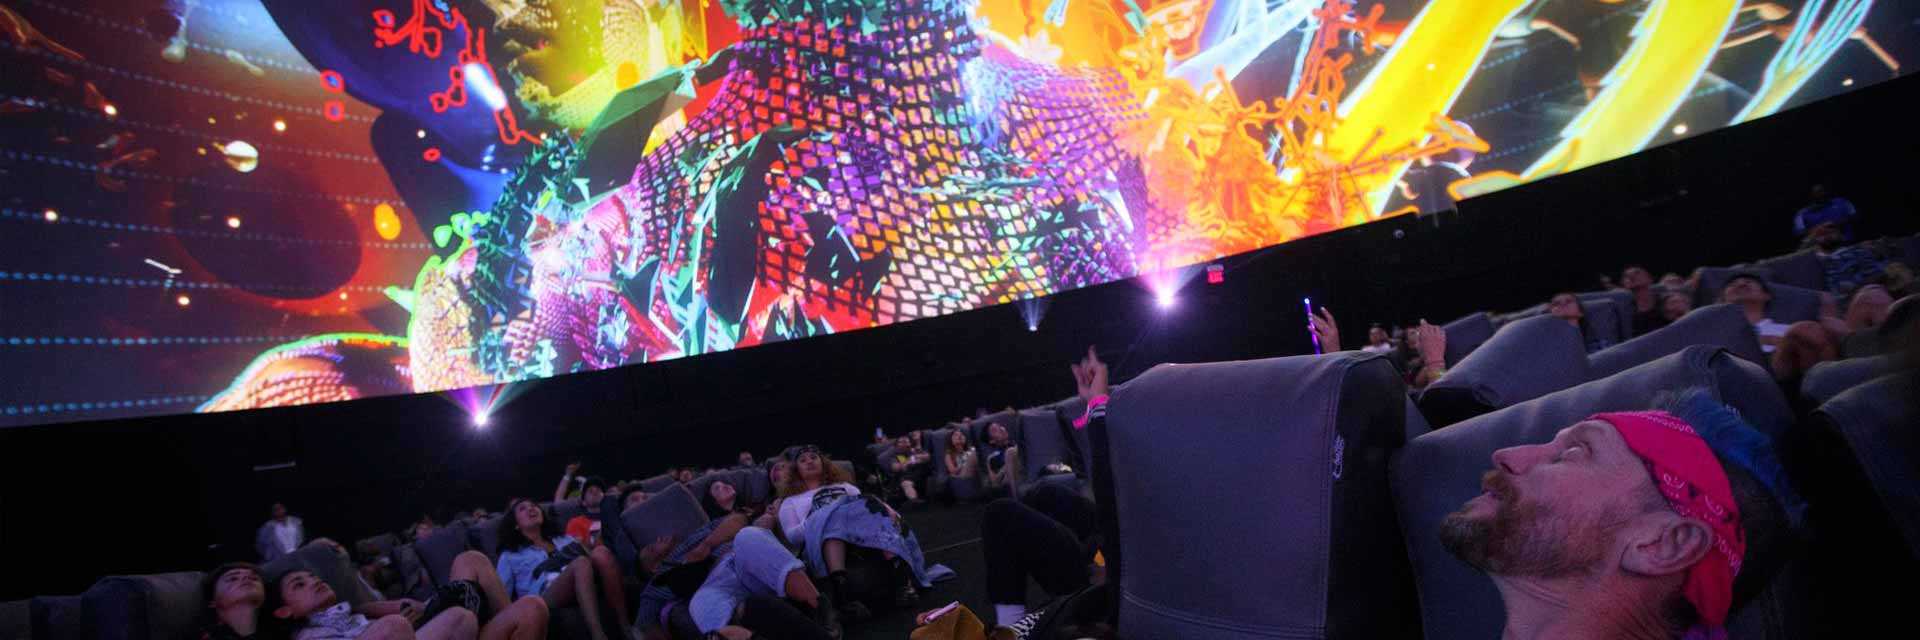 120ft Coachella Projection Theater Dome